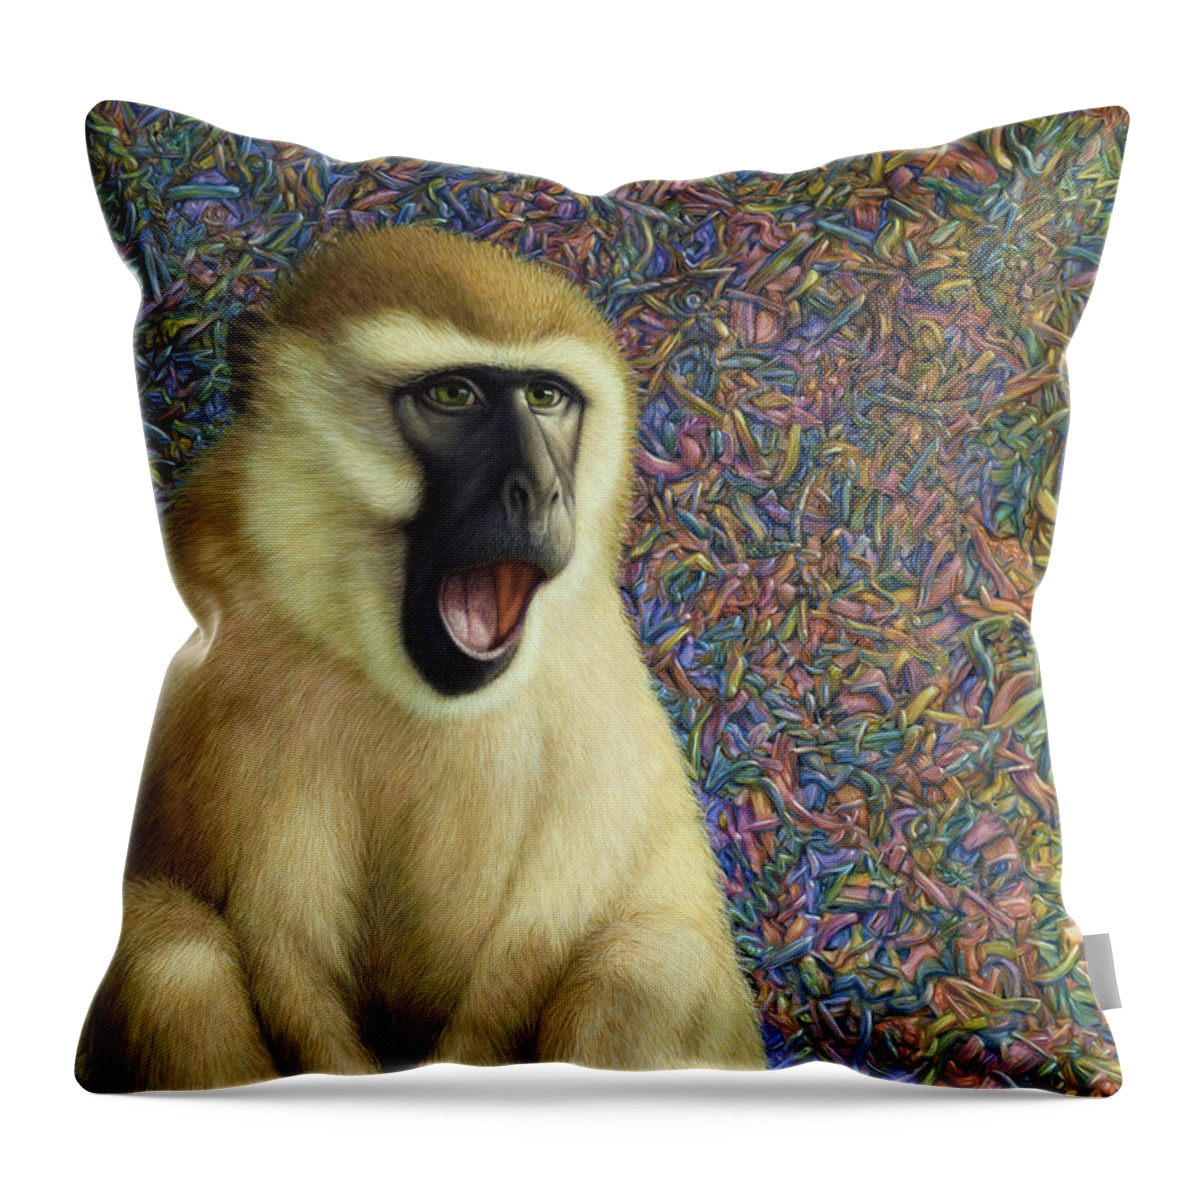 Monkey Throw Pillow featuring the painting Speechless by James W Johnson